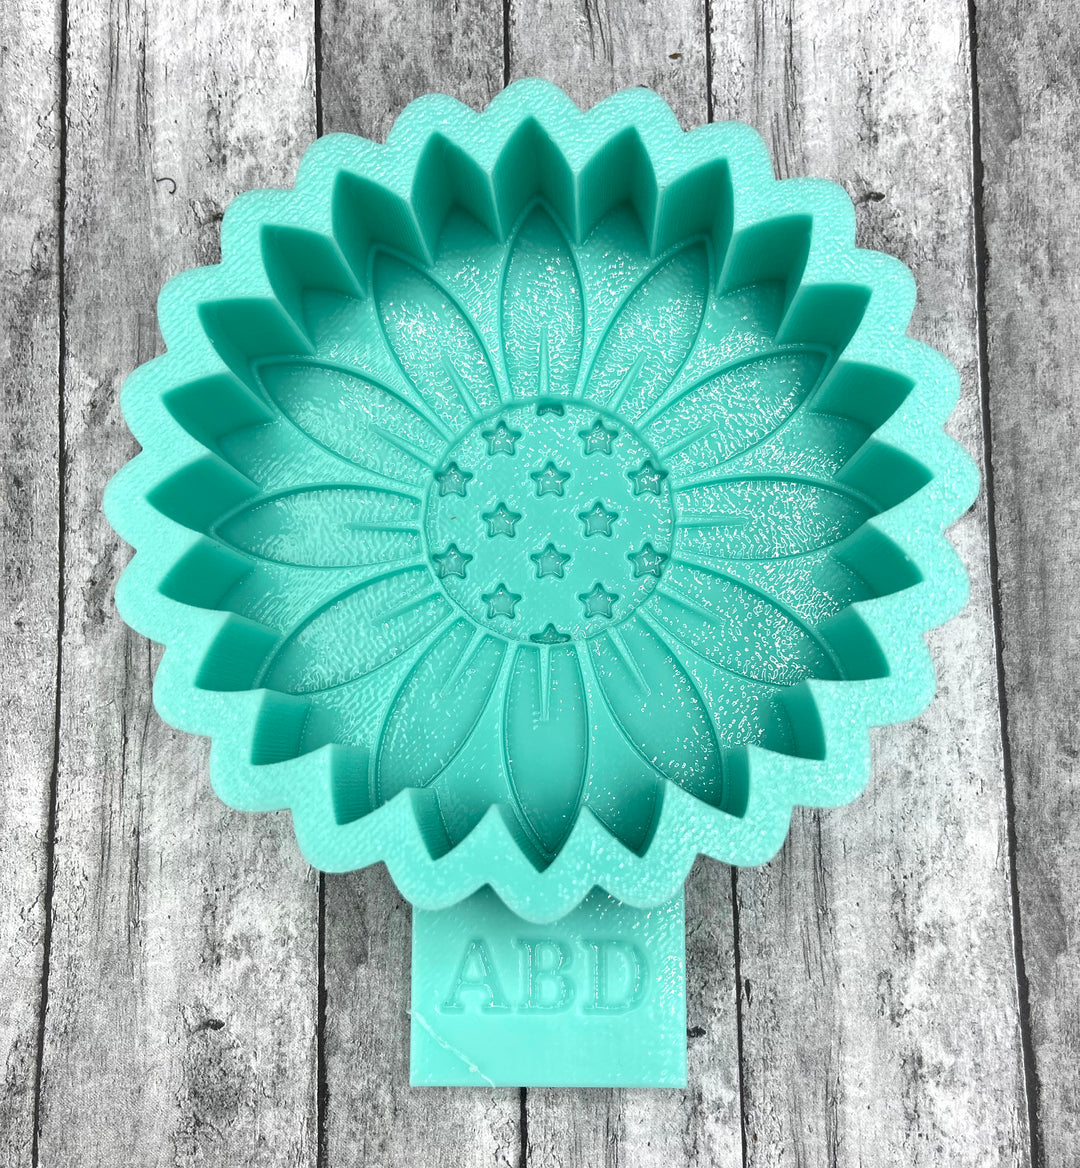 Flower with Star Center Freshie Silicone Mold